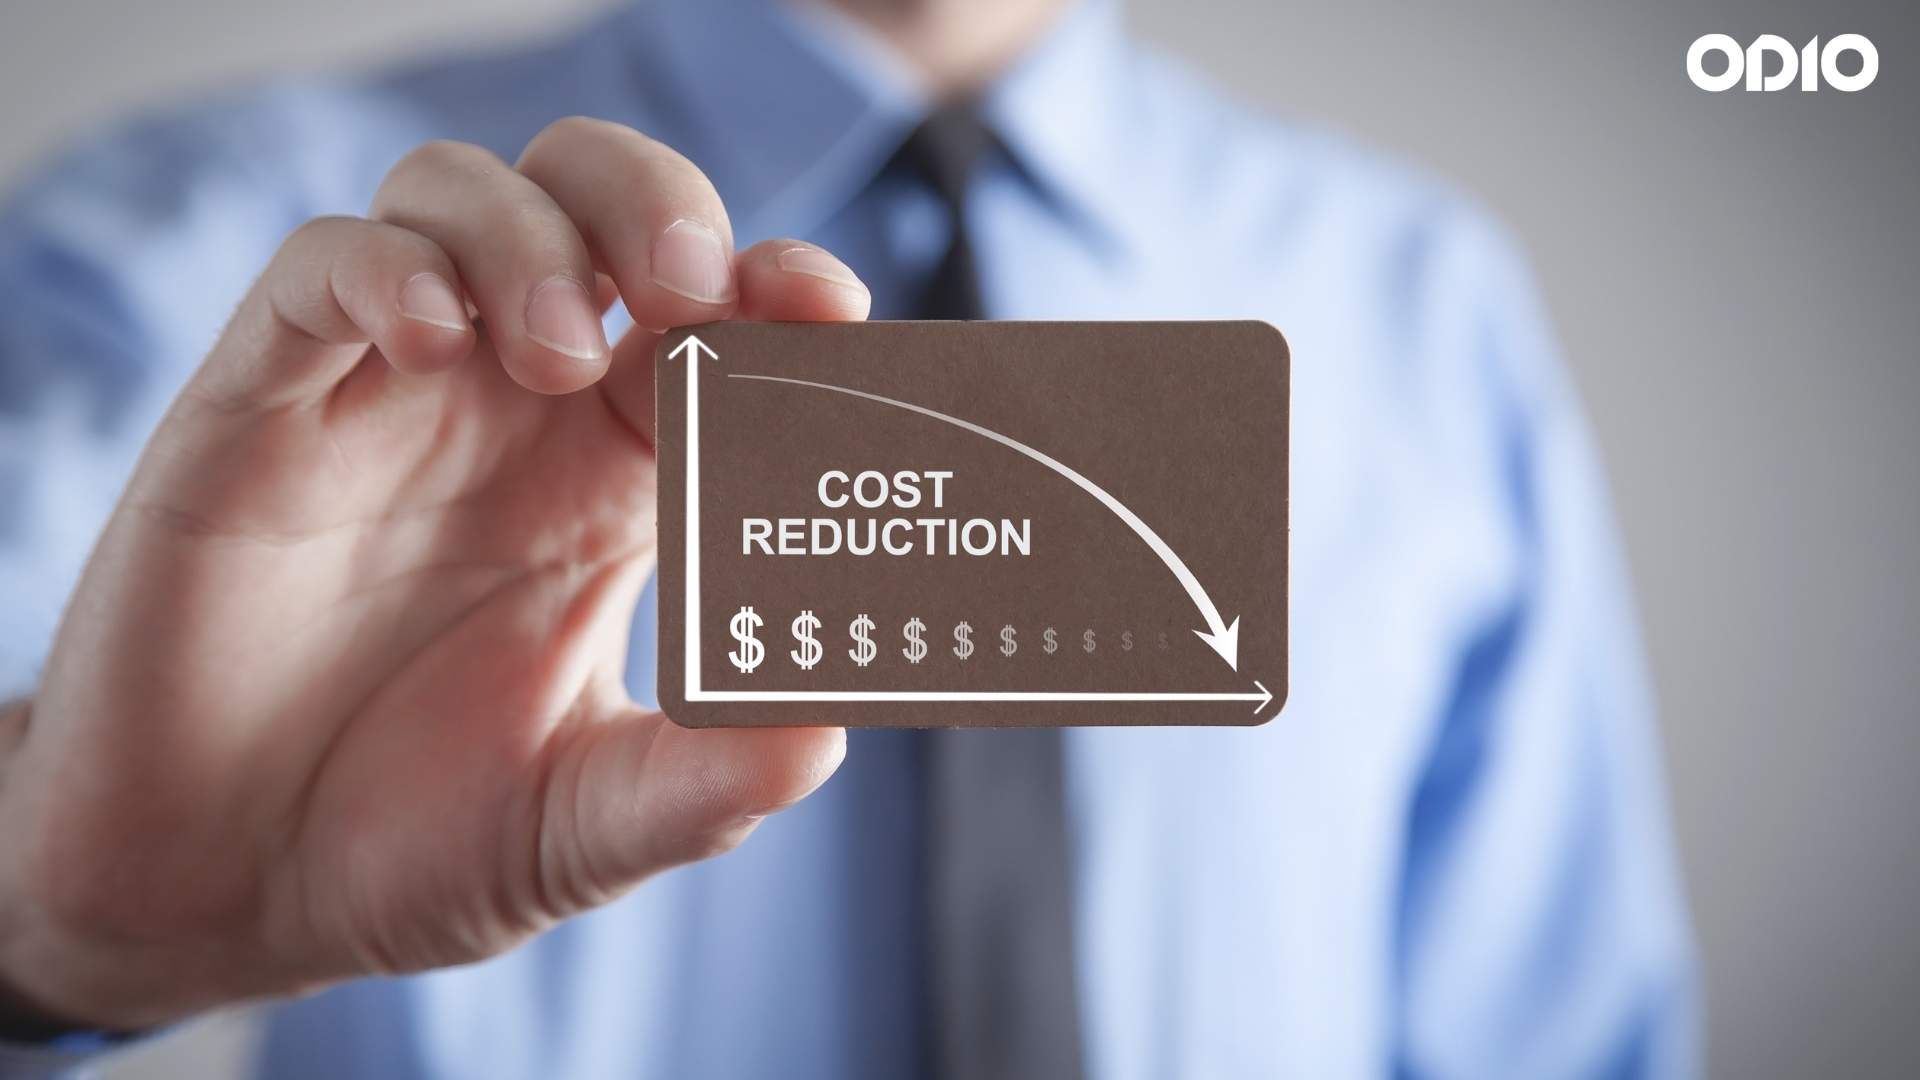 Image showing cost reduction written on a card insinuating the AI-Driven Cost Reduction Strategies for Call Centers